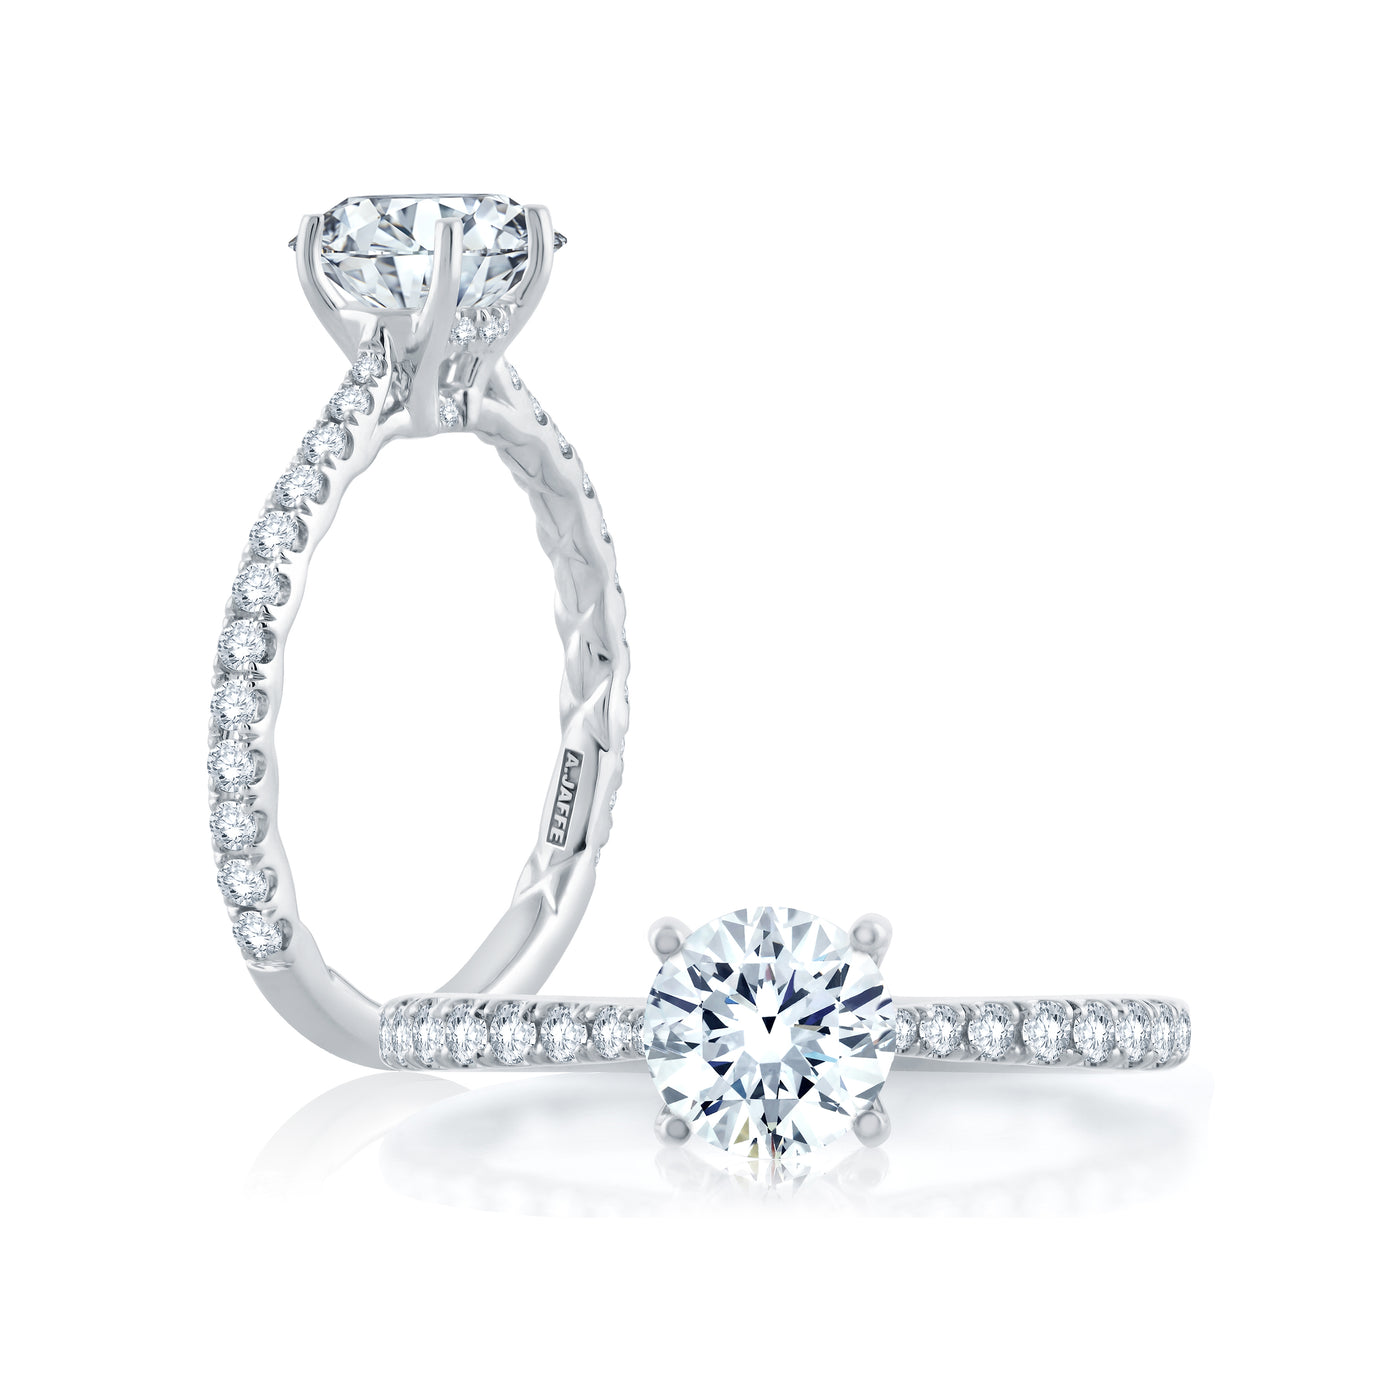 Scalloped Pavé Diamond Engagement Ring with Quilted Interior